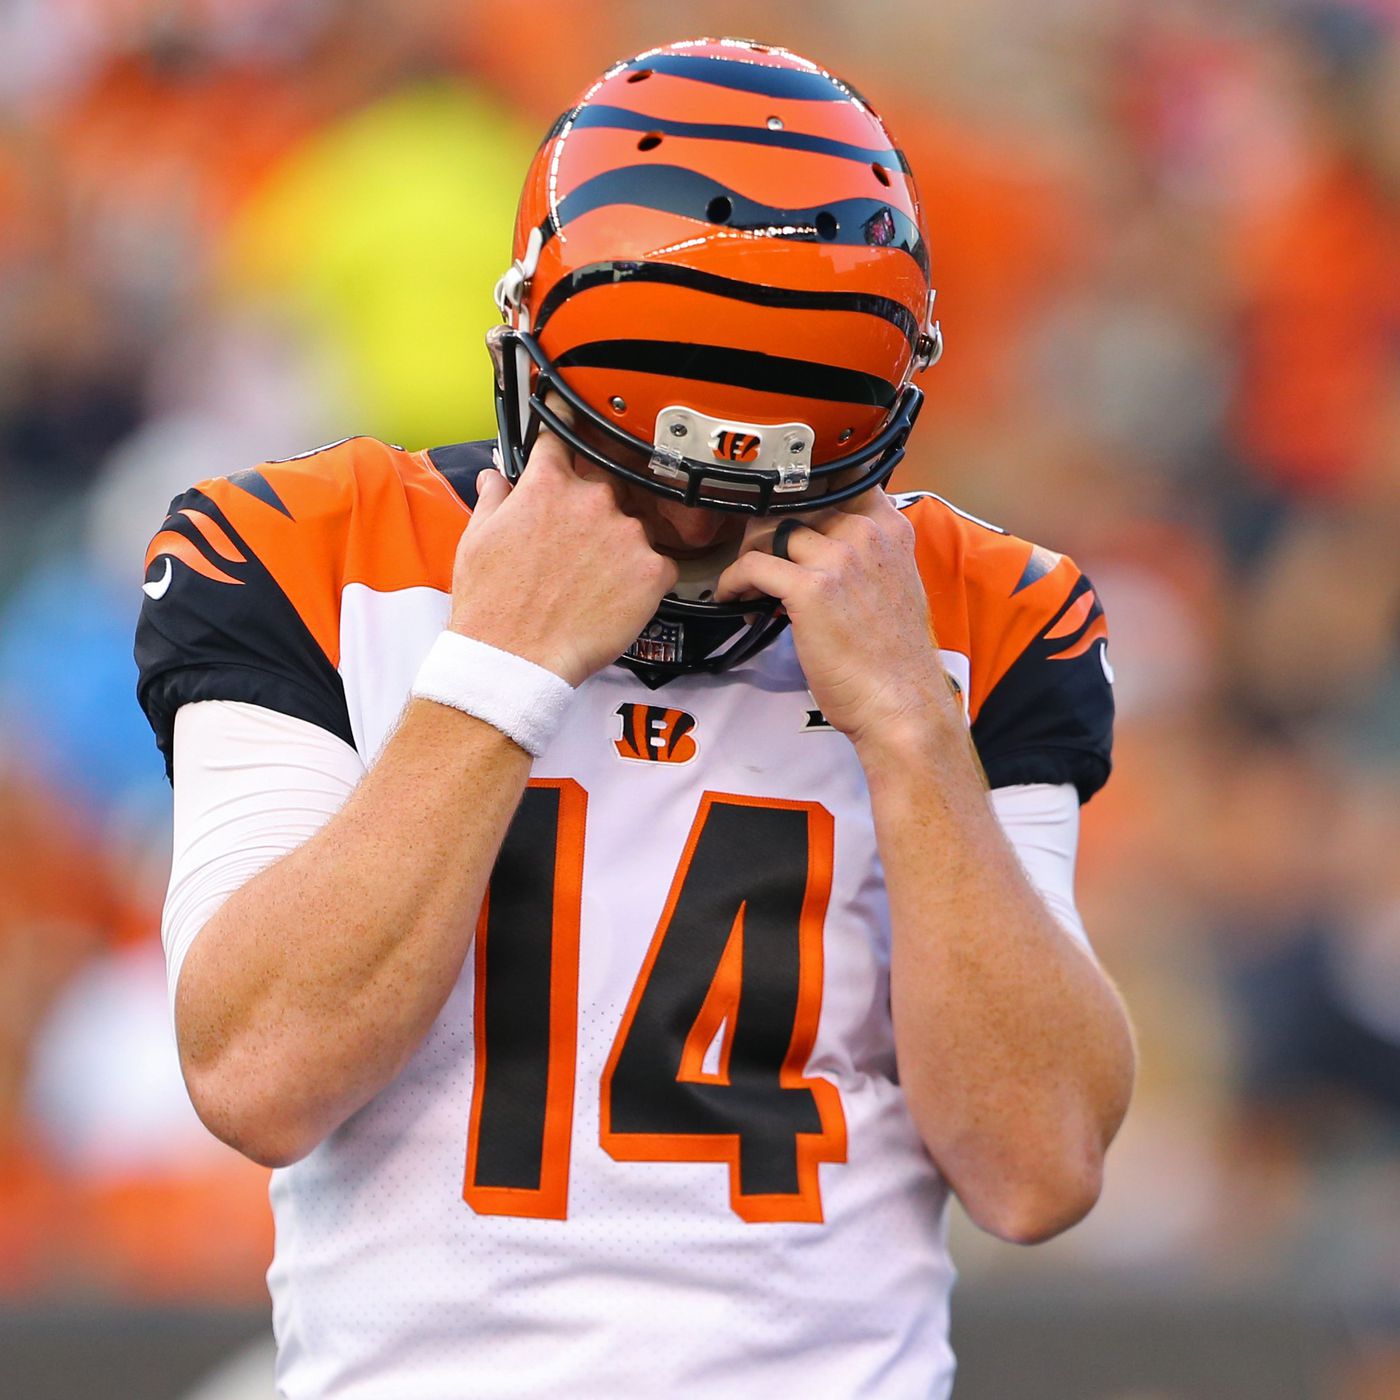 what happened to the bengals today